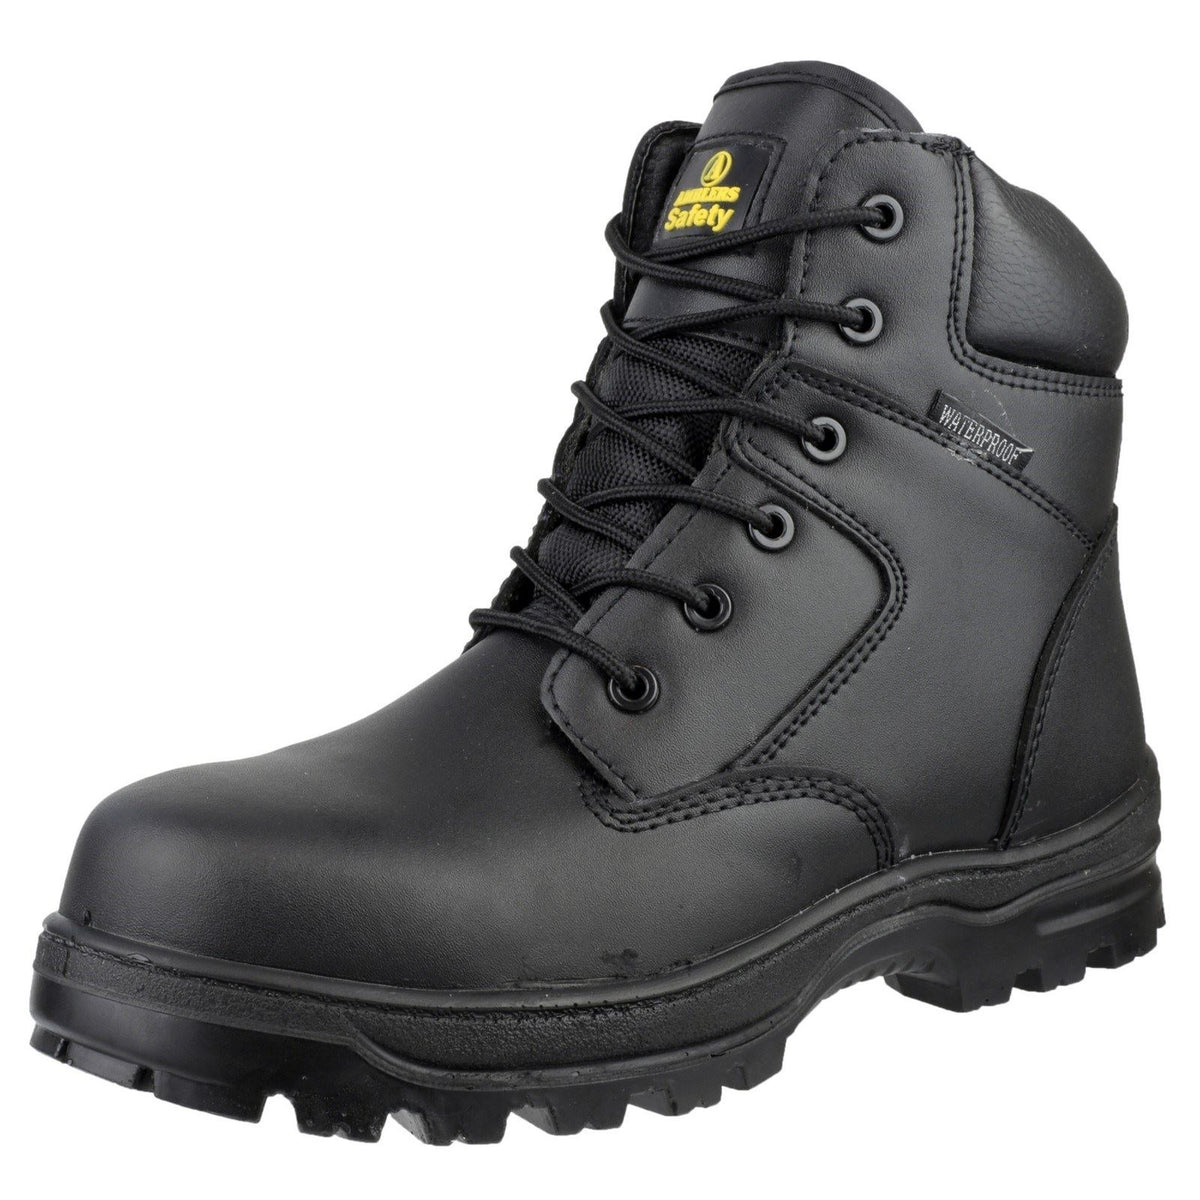 Amblers Safety FS006C Safety Boots